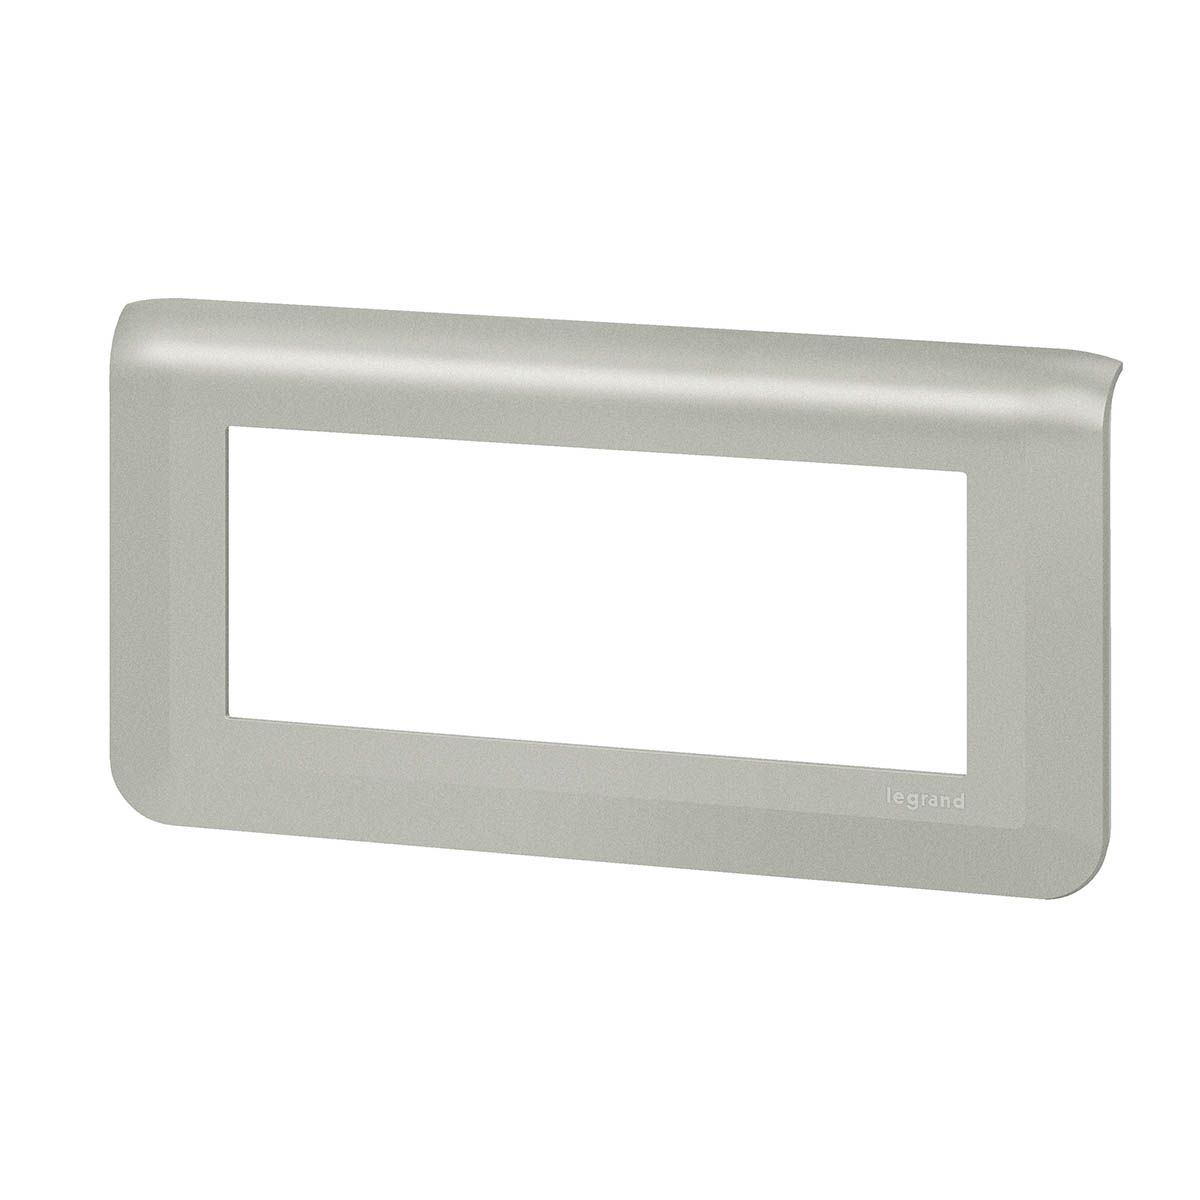 Legrand 512 Light Switch Cover